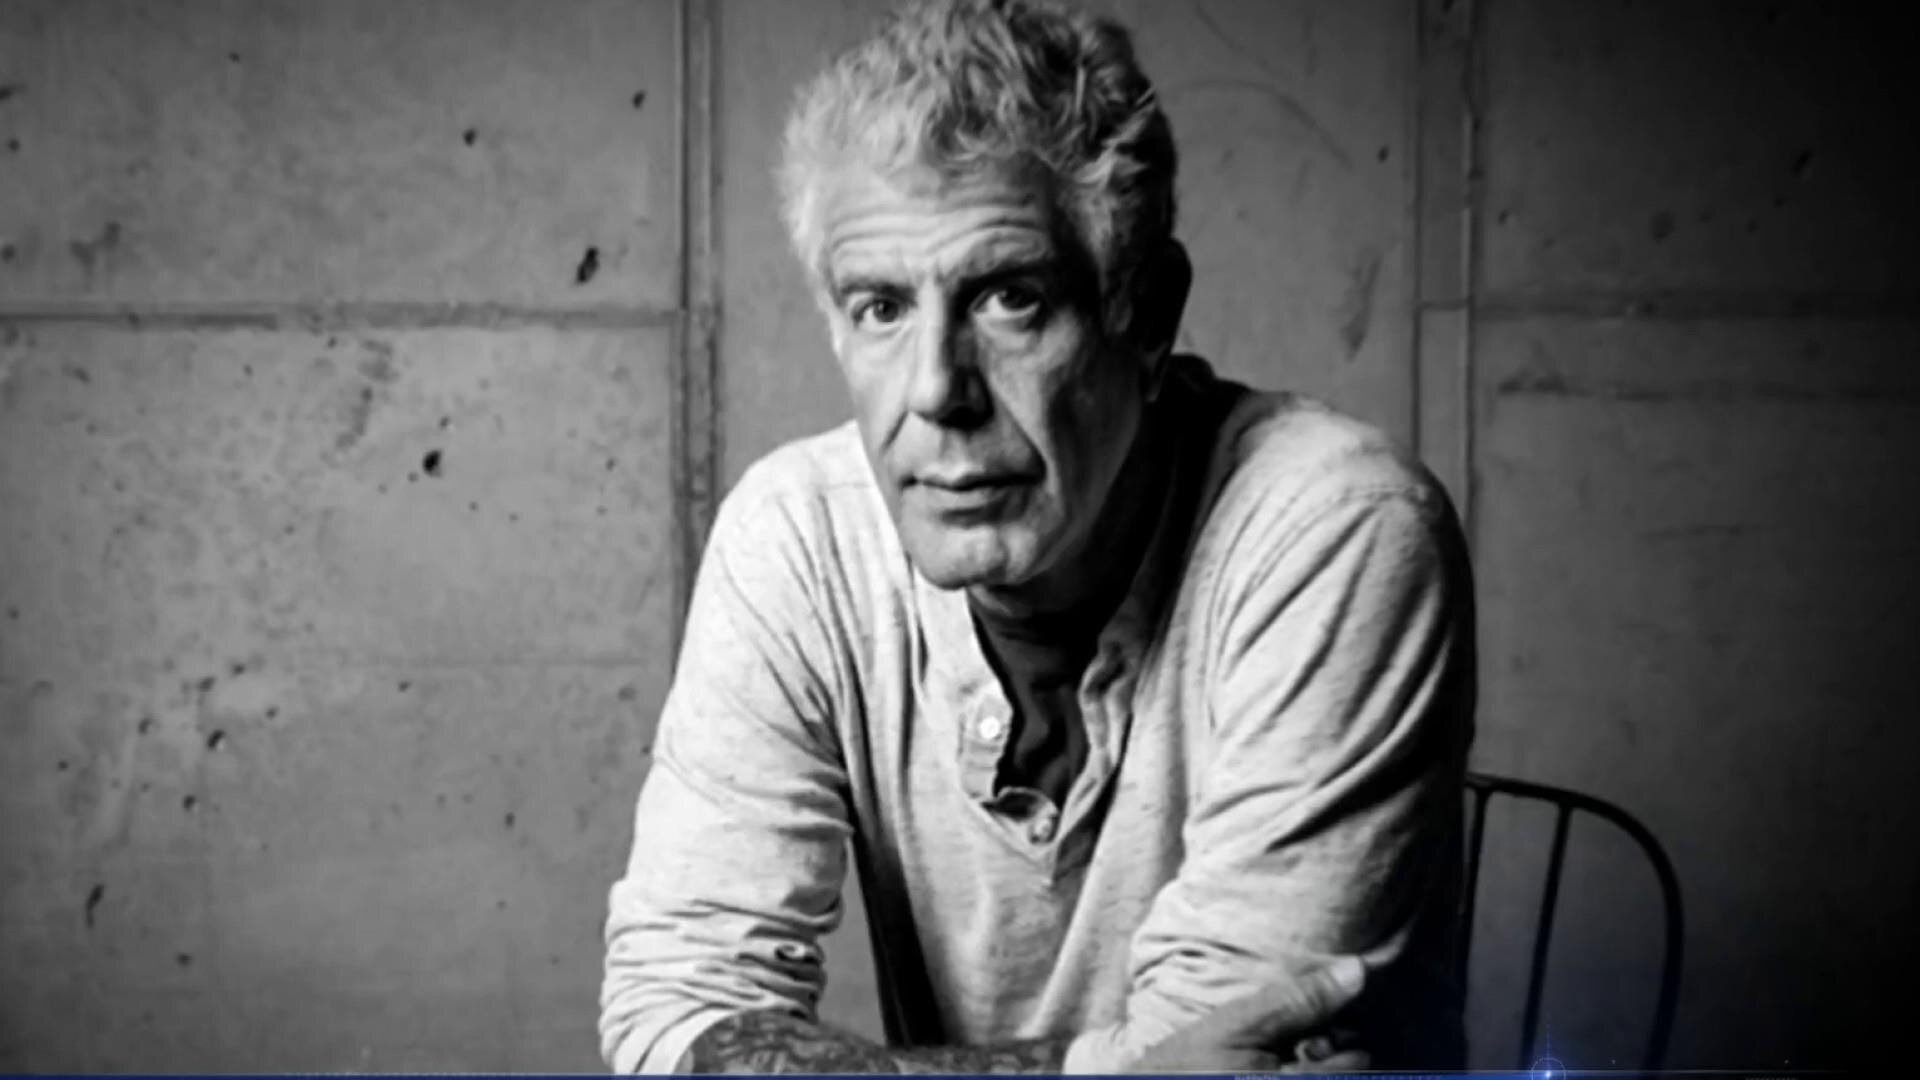 A Tribute to Anthony Bourdain